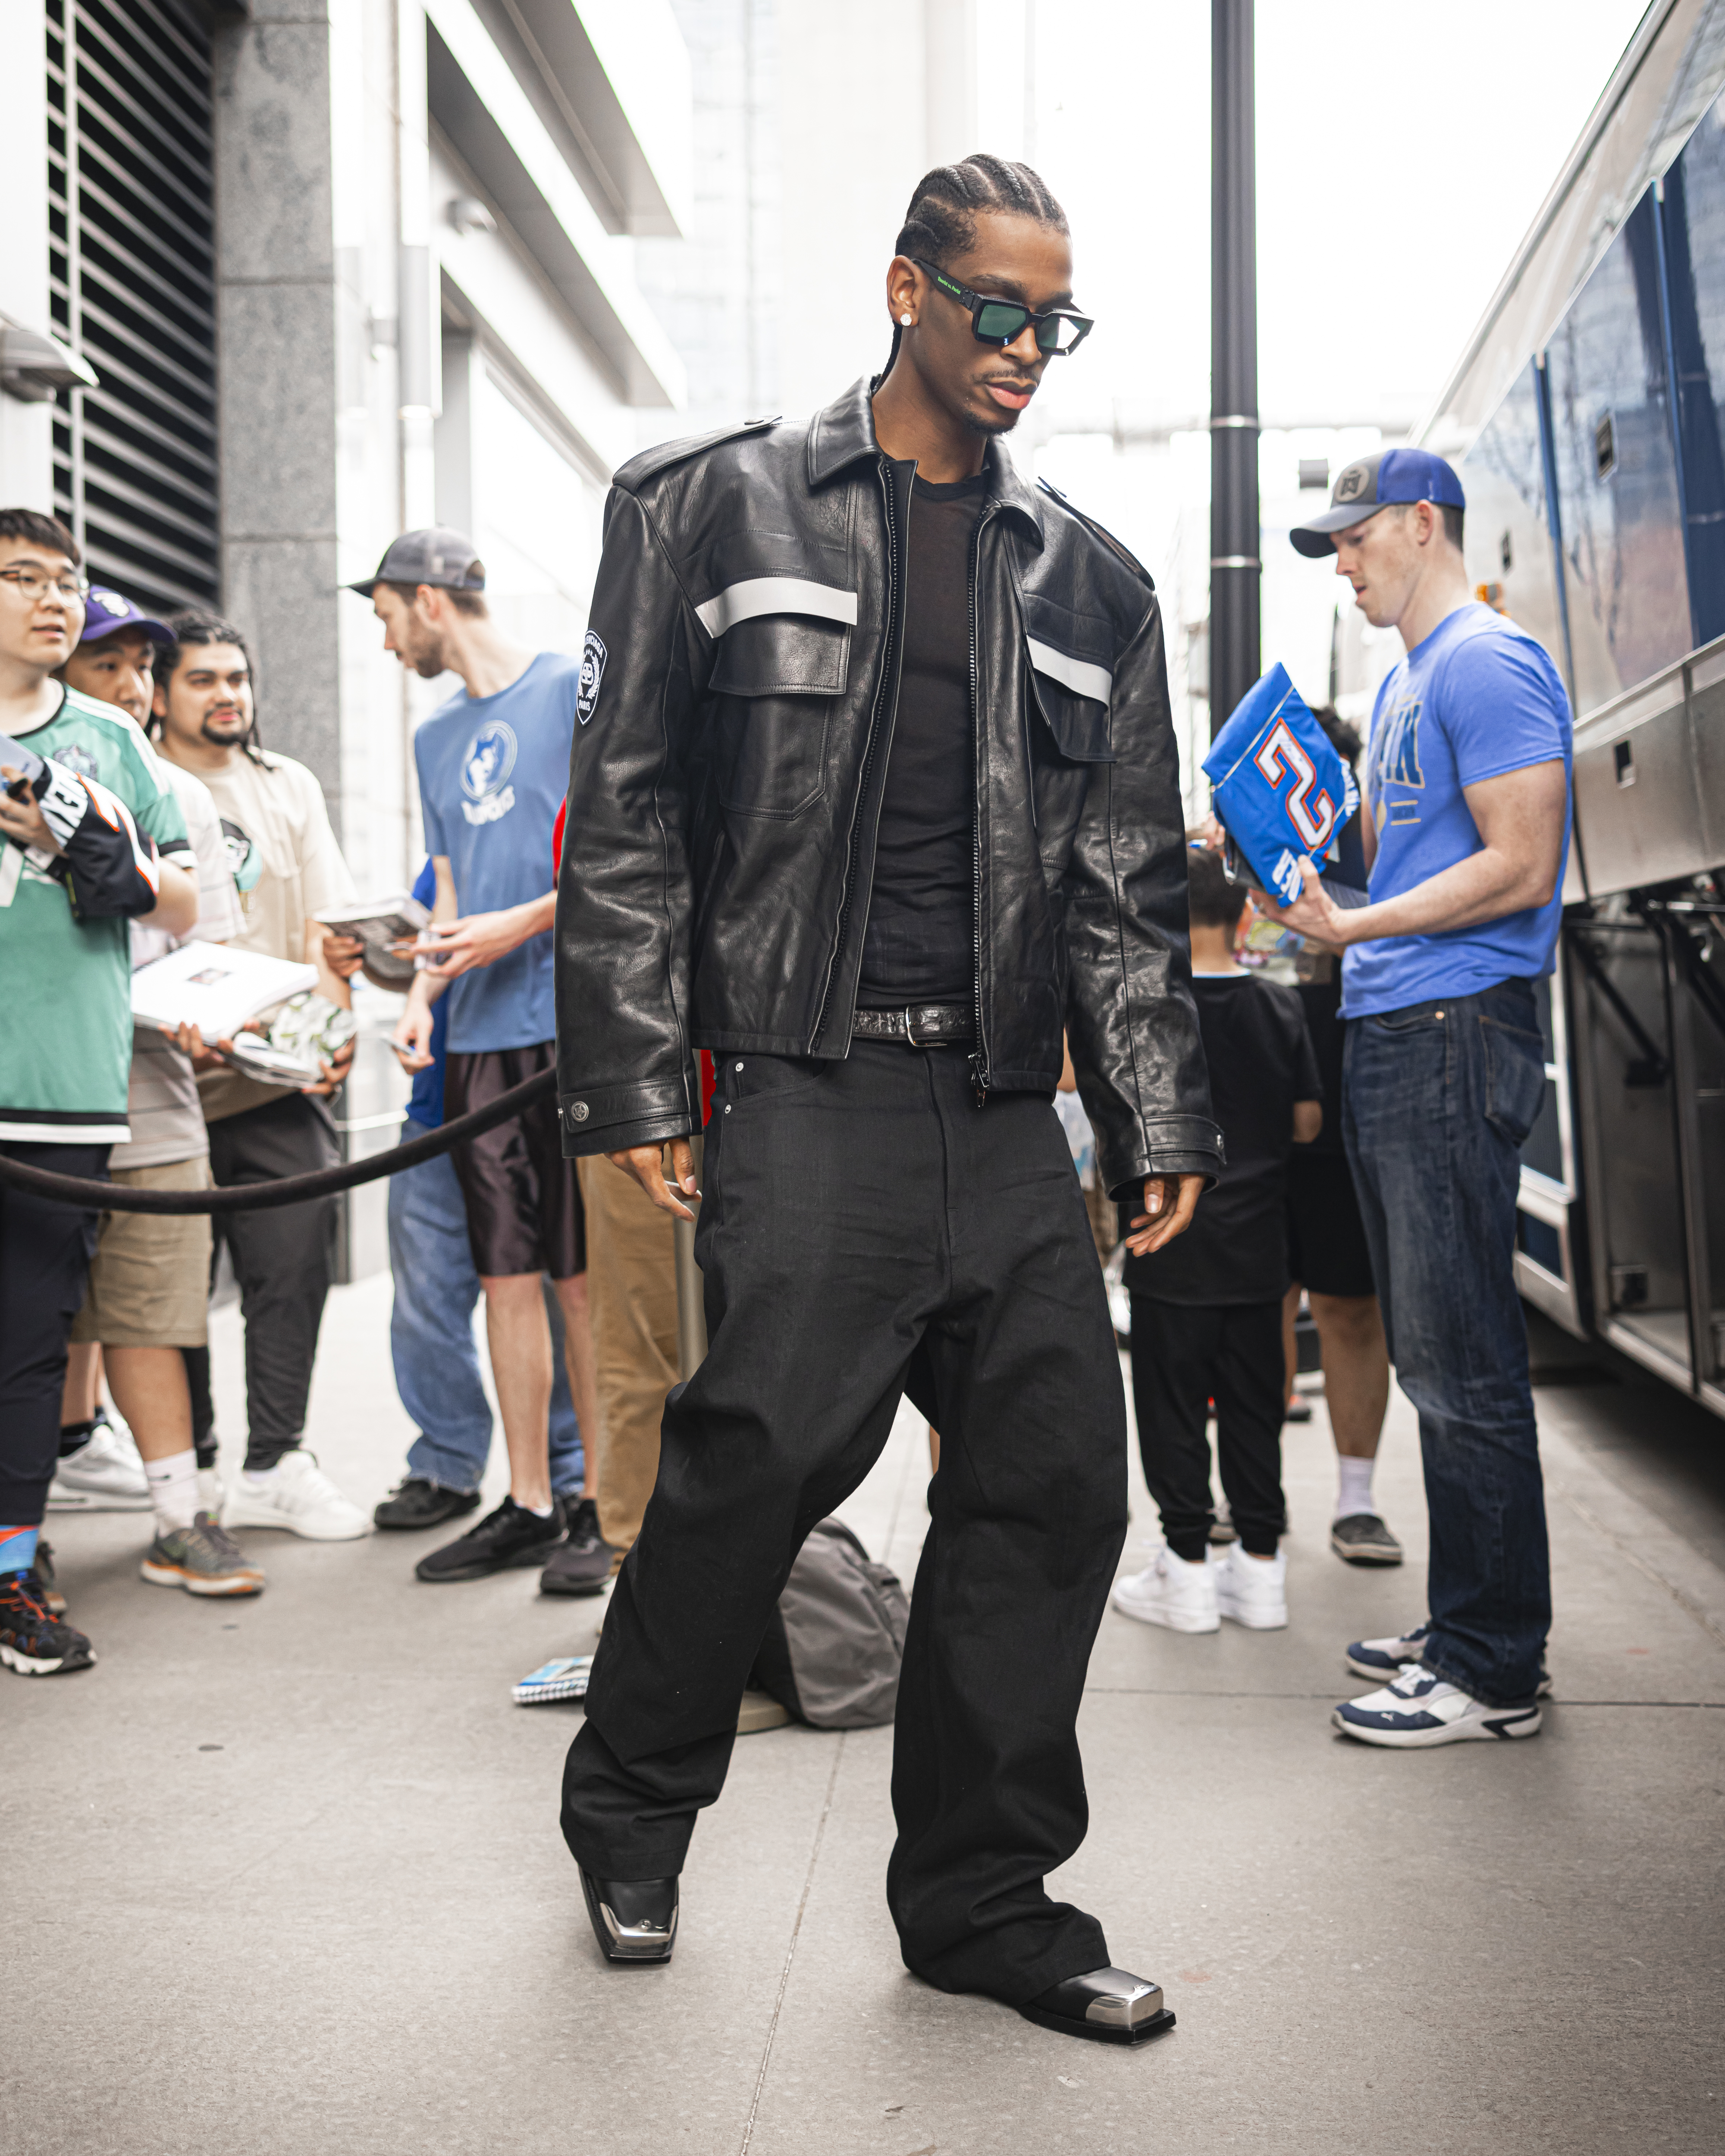 Person in a black leather jacket and pants walks past bystanders, possibly a sports figure arriving at an event